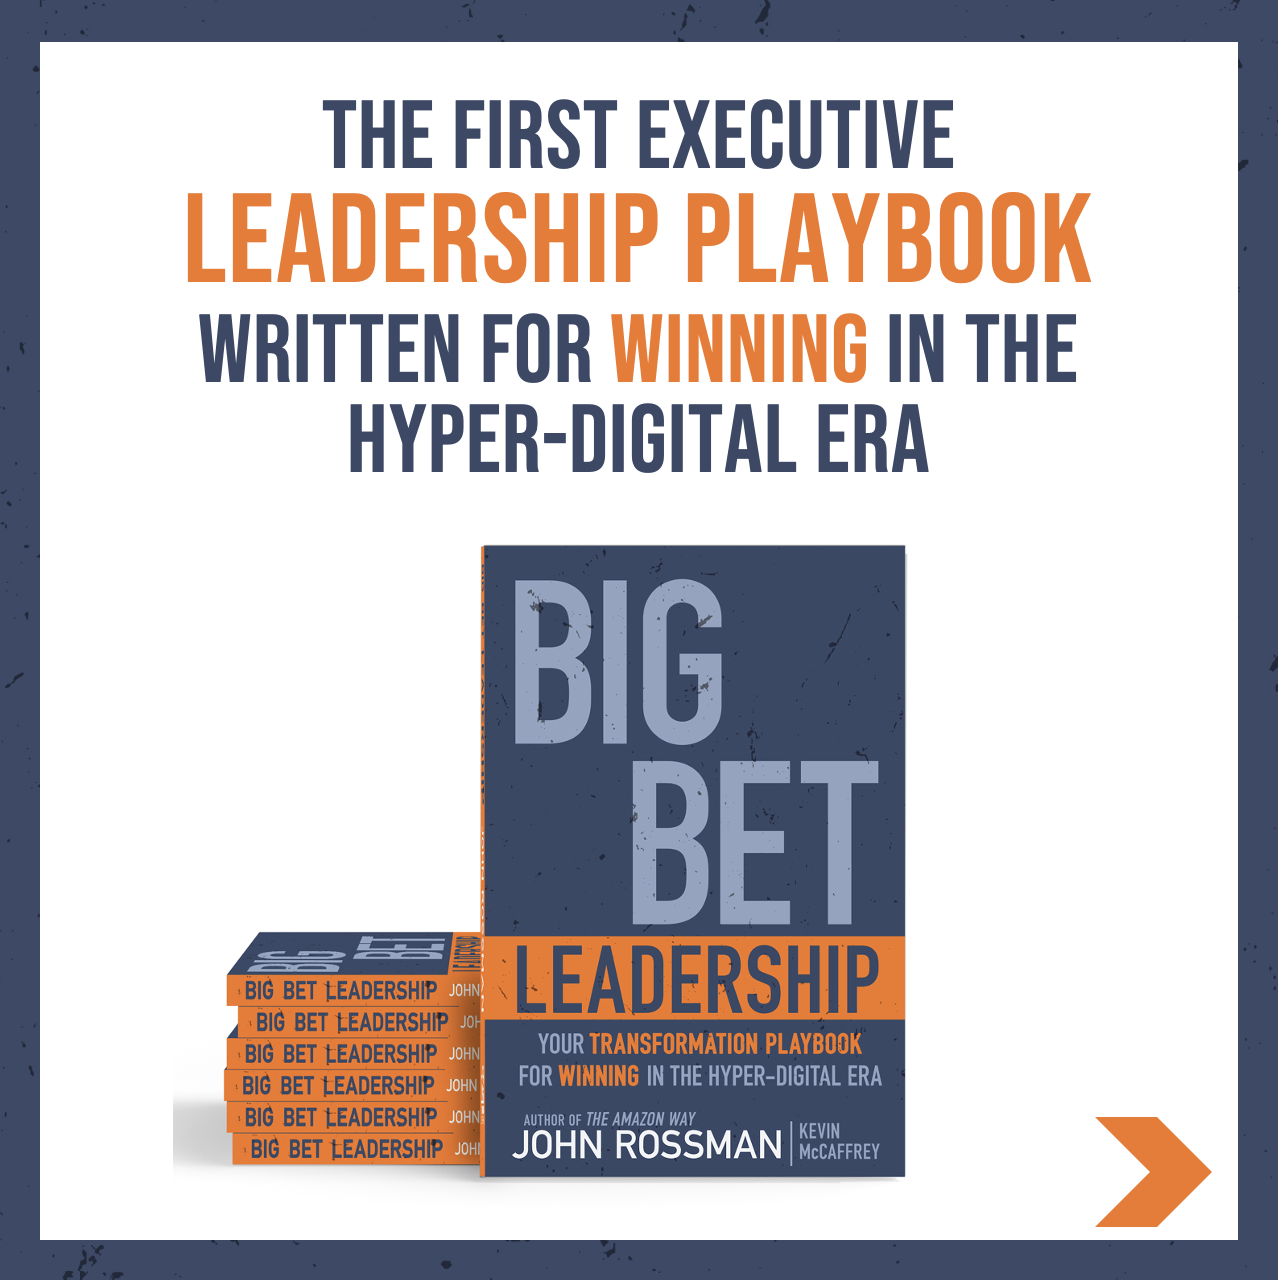 An image of the Big Bet Leadership book.